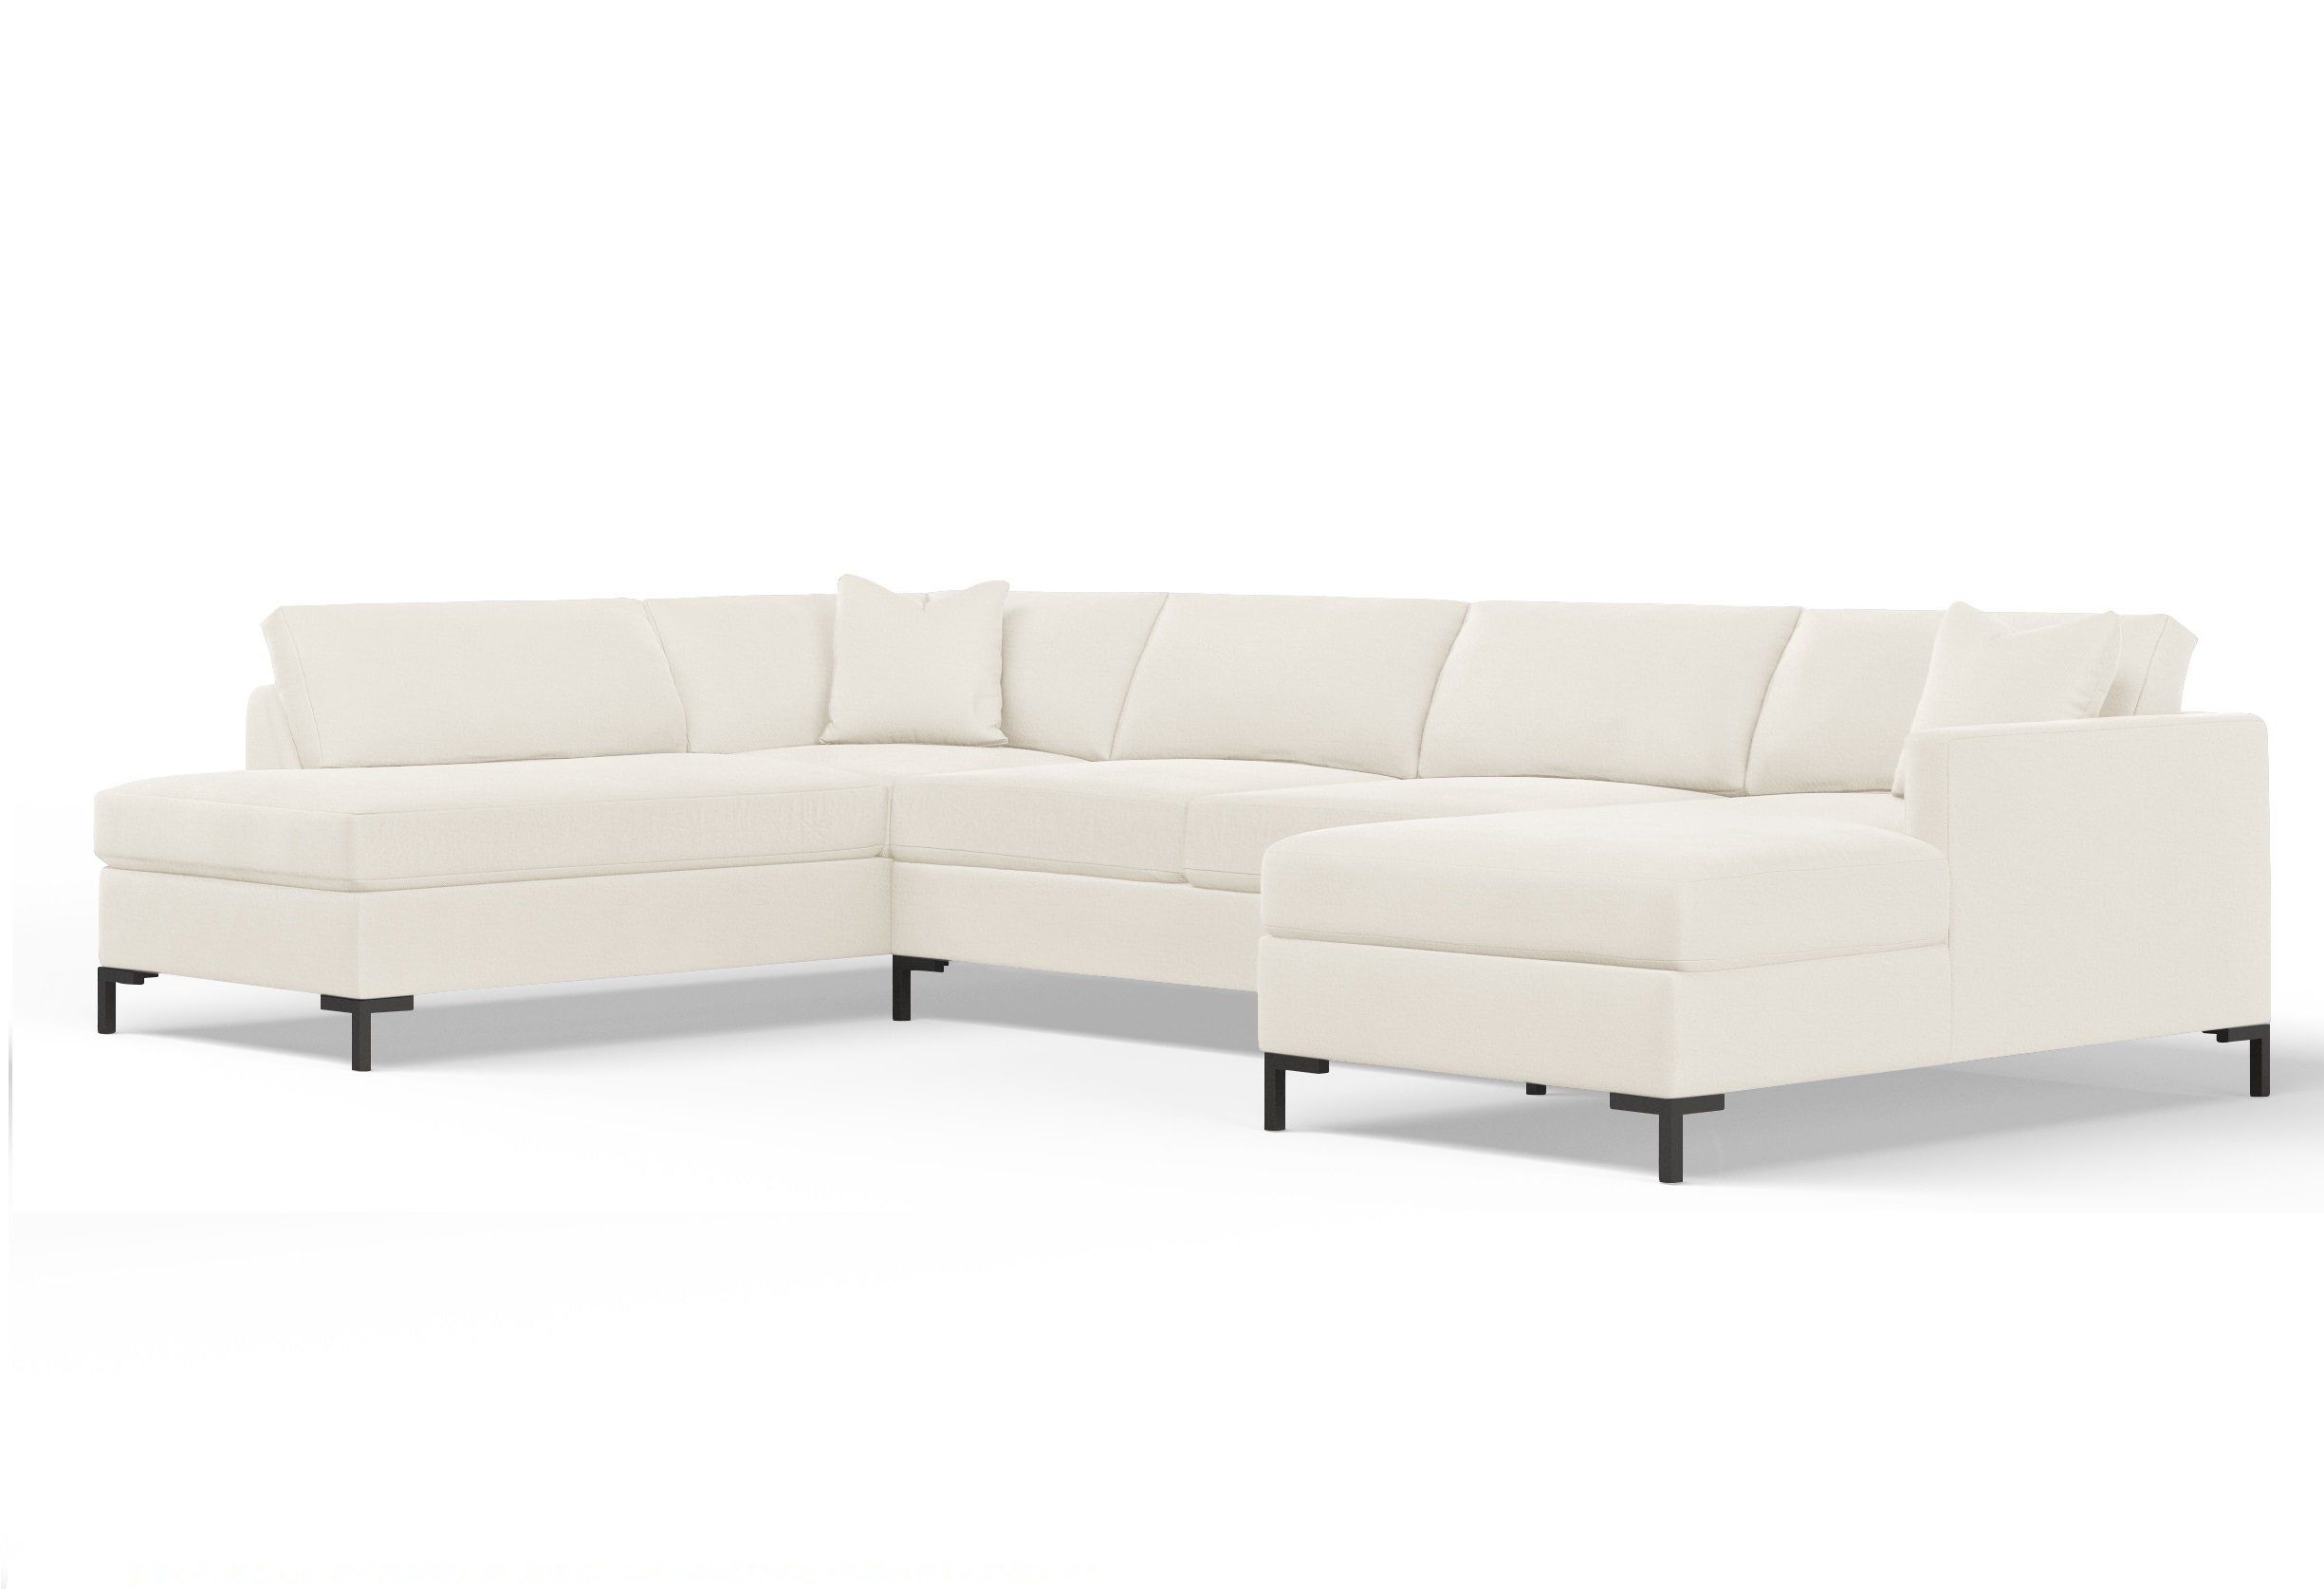 Wayfair Custom Upholstery™ Audrey Modular Sectional | Wayfair Intended For Cohen Down 2 Piece Sectionals (View 29 of 30)